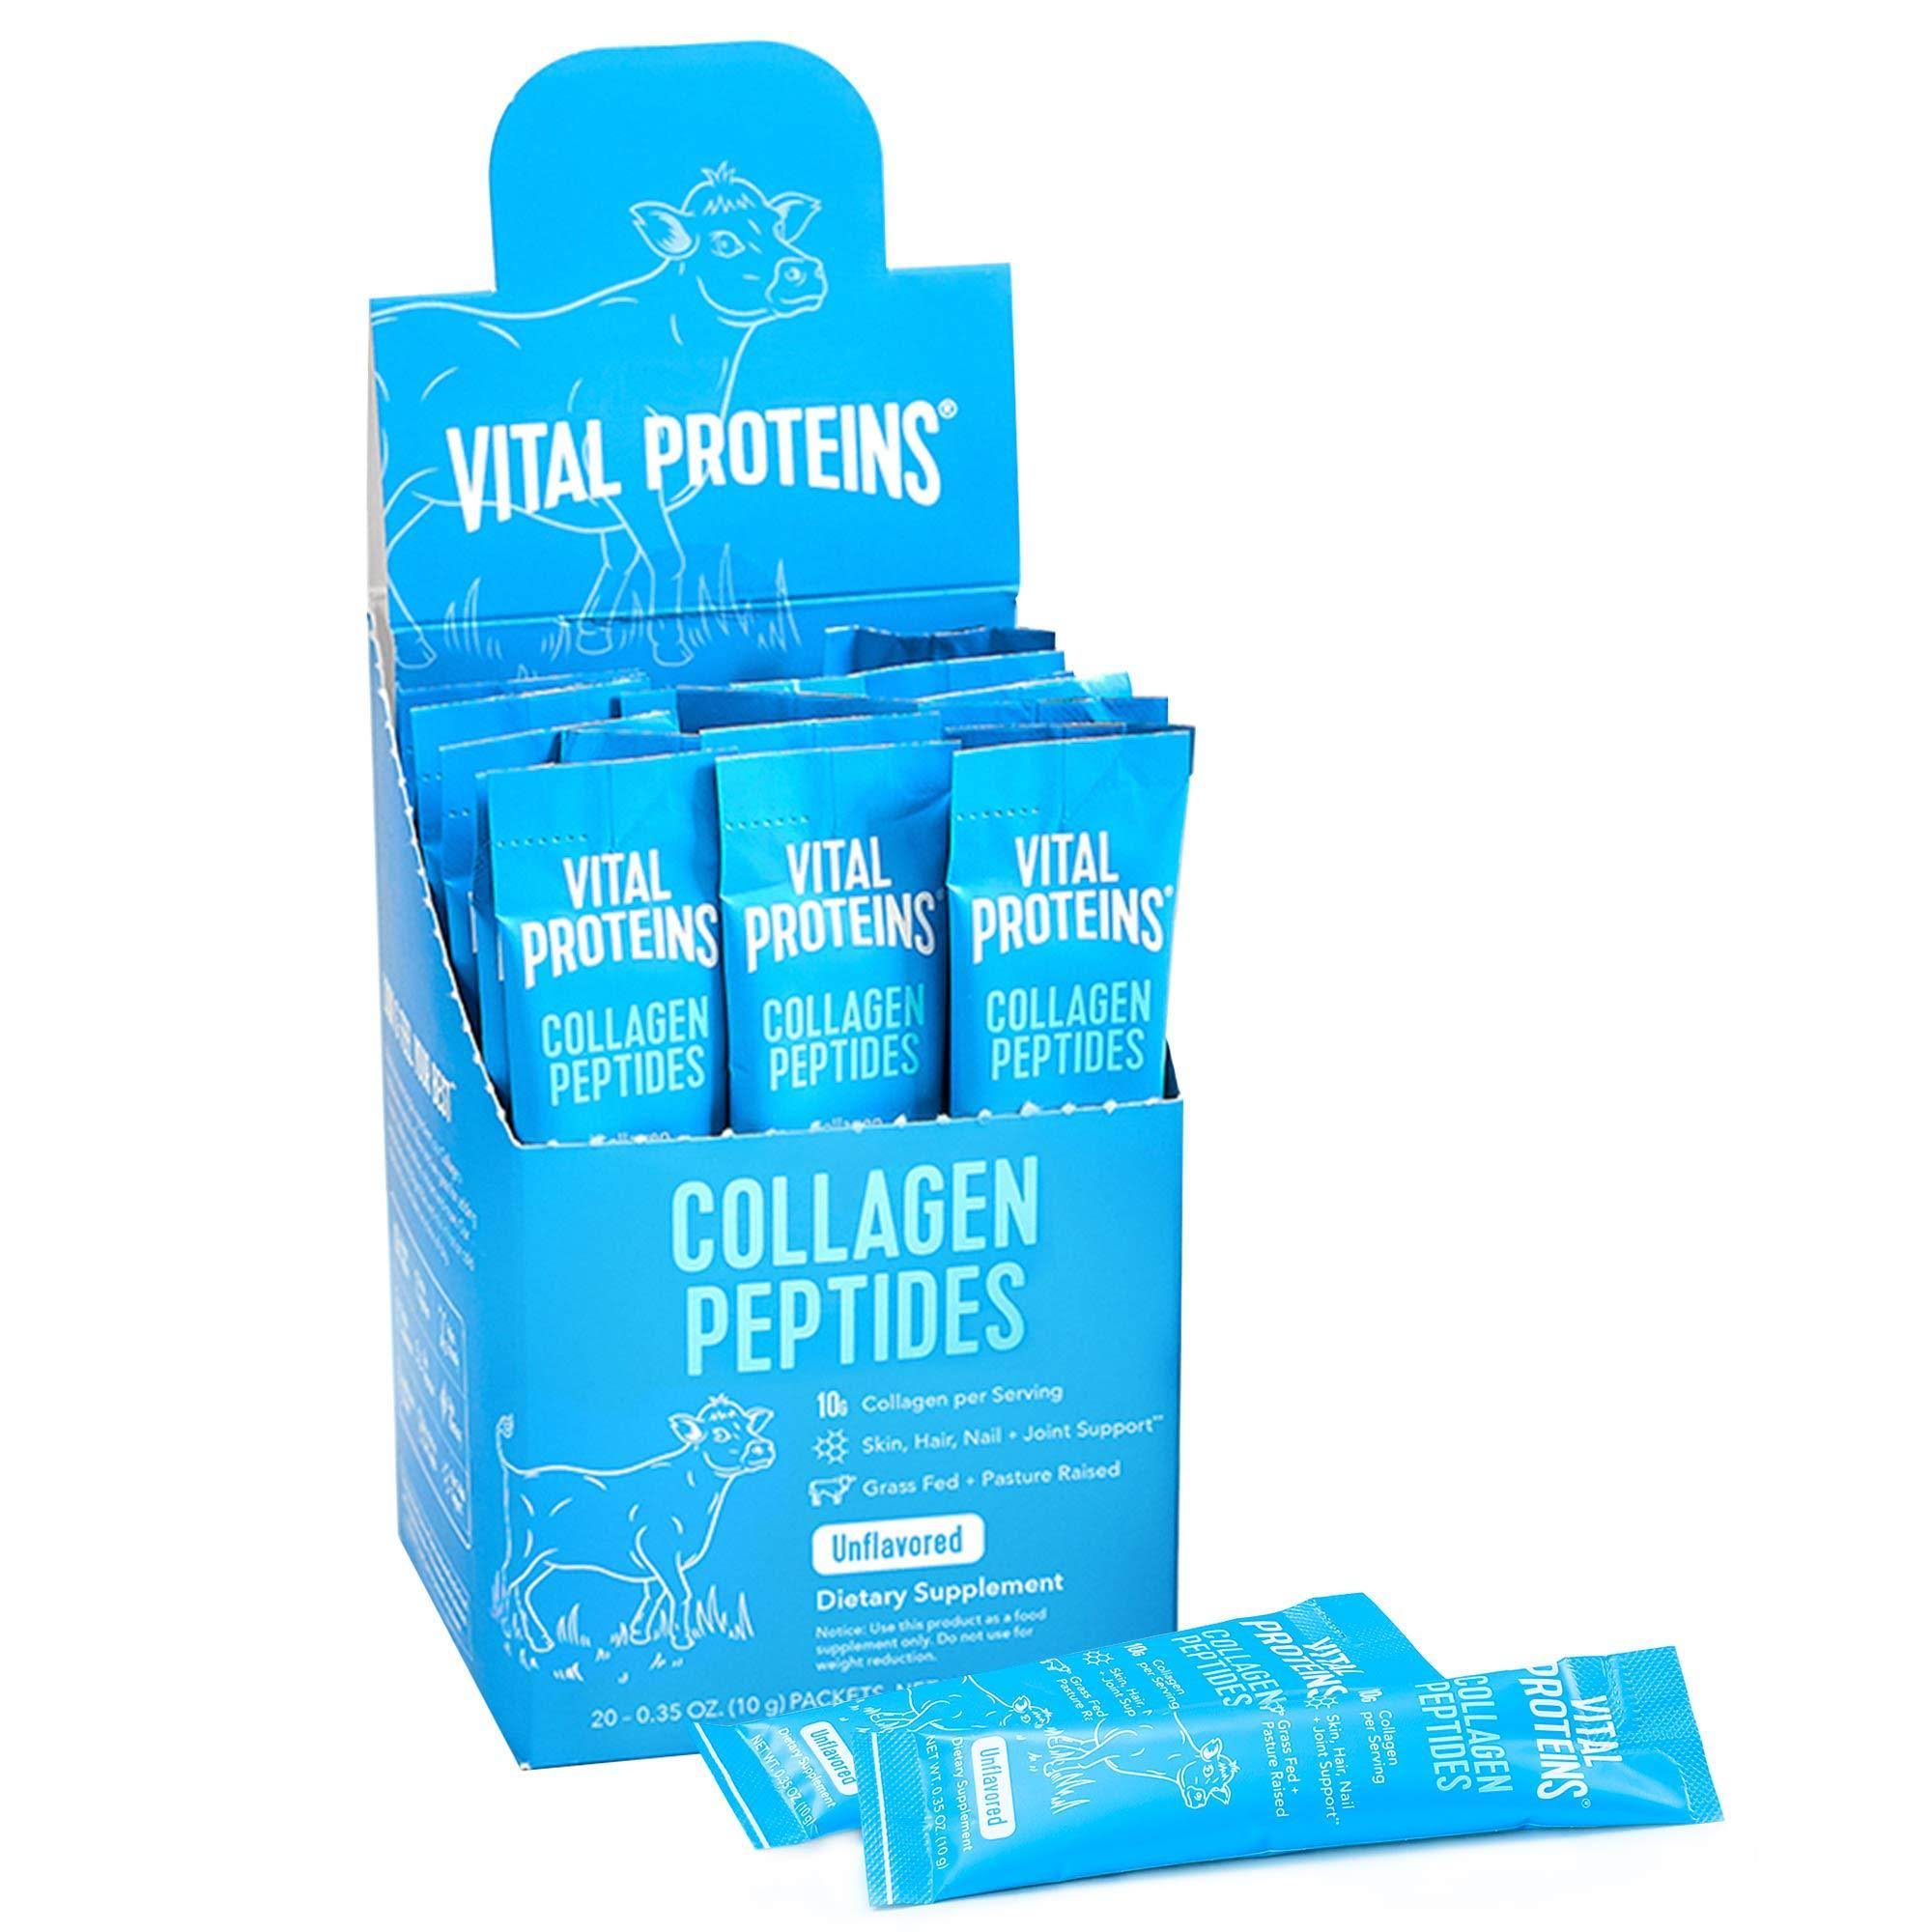 Vital Proteins Grass Fed Pausture Raised Collagen Peptides Dietary Supplement - 10g, 20 Packets